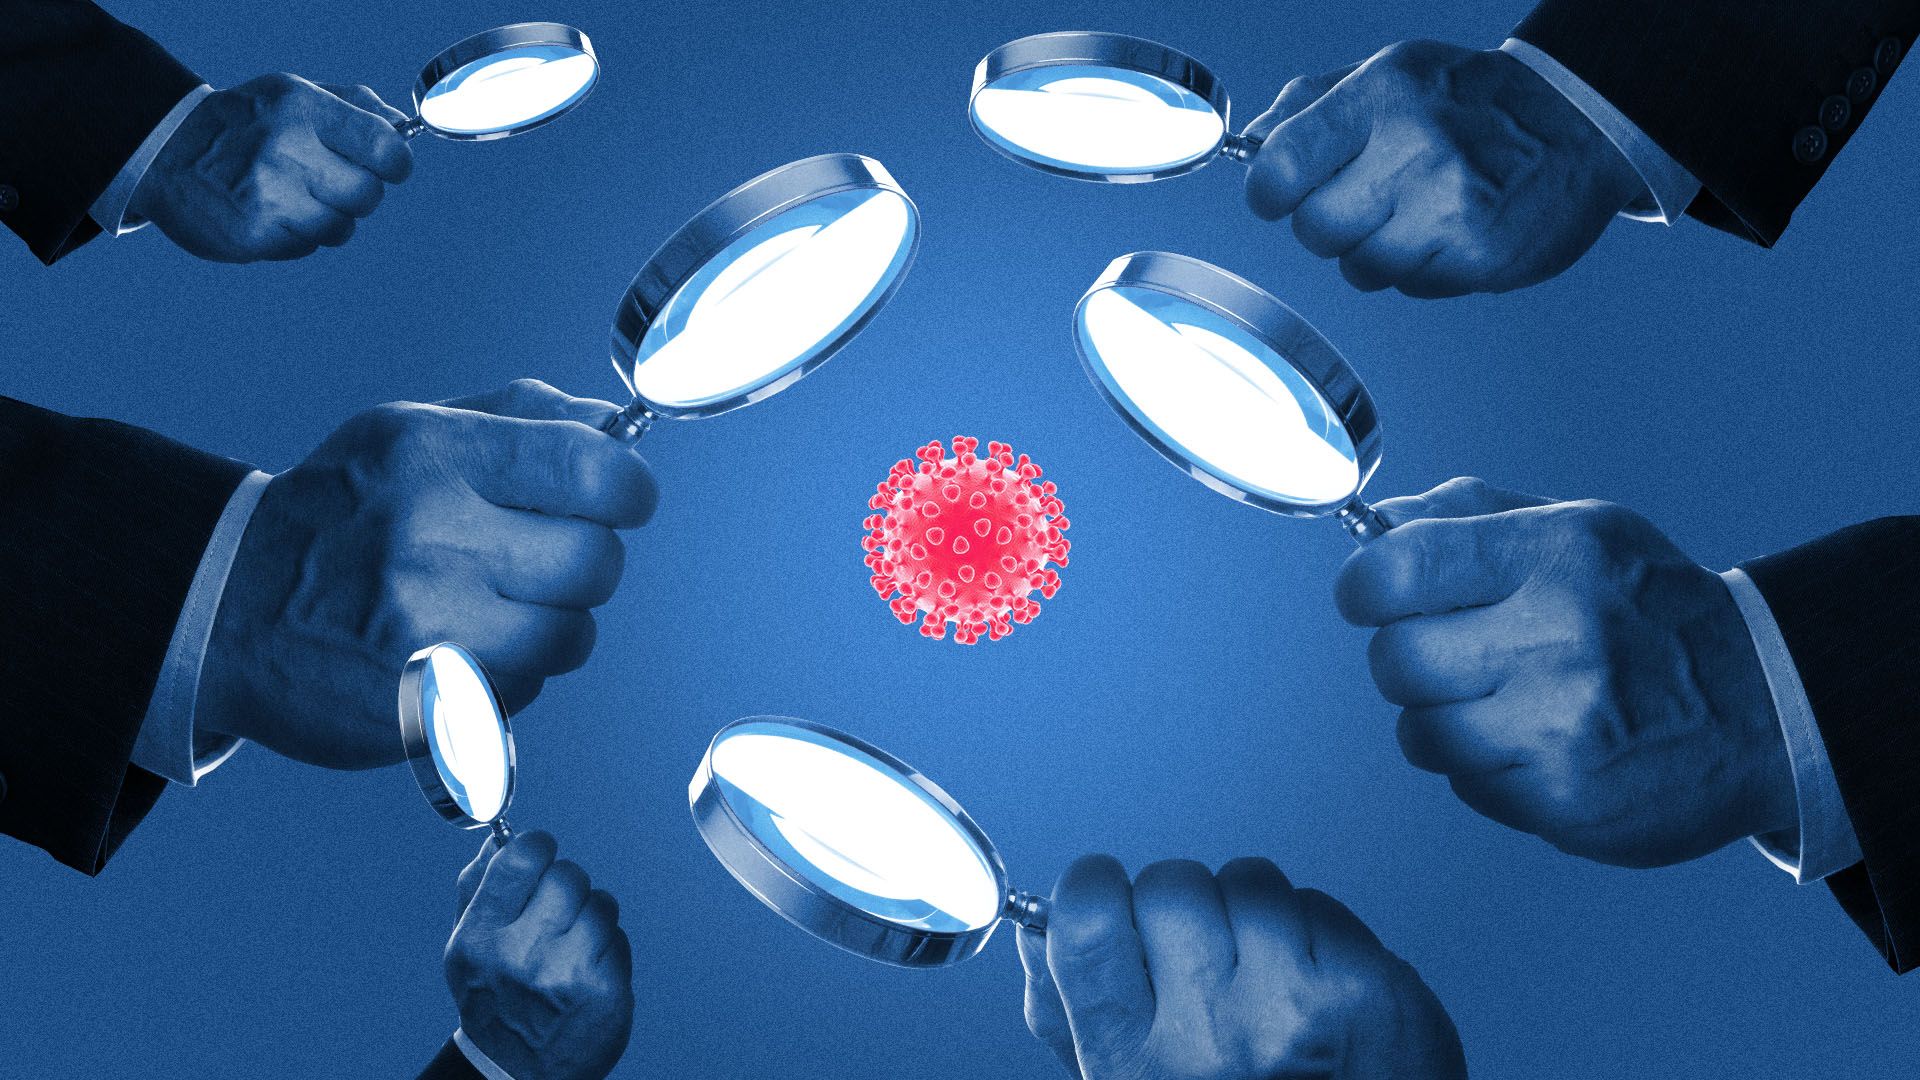 Illustration of a virus surrounded by hands with magnifying glasses